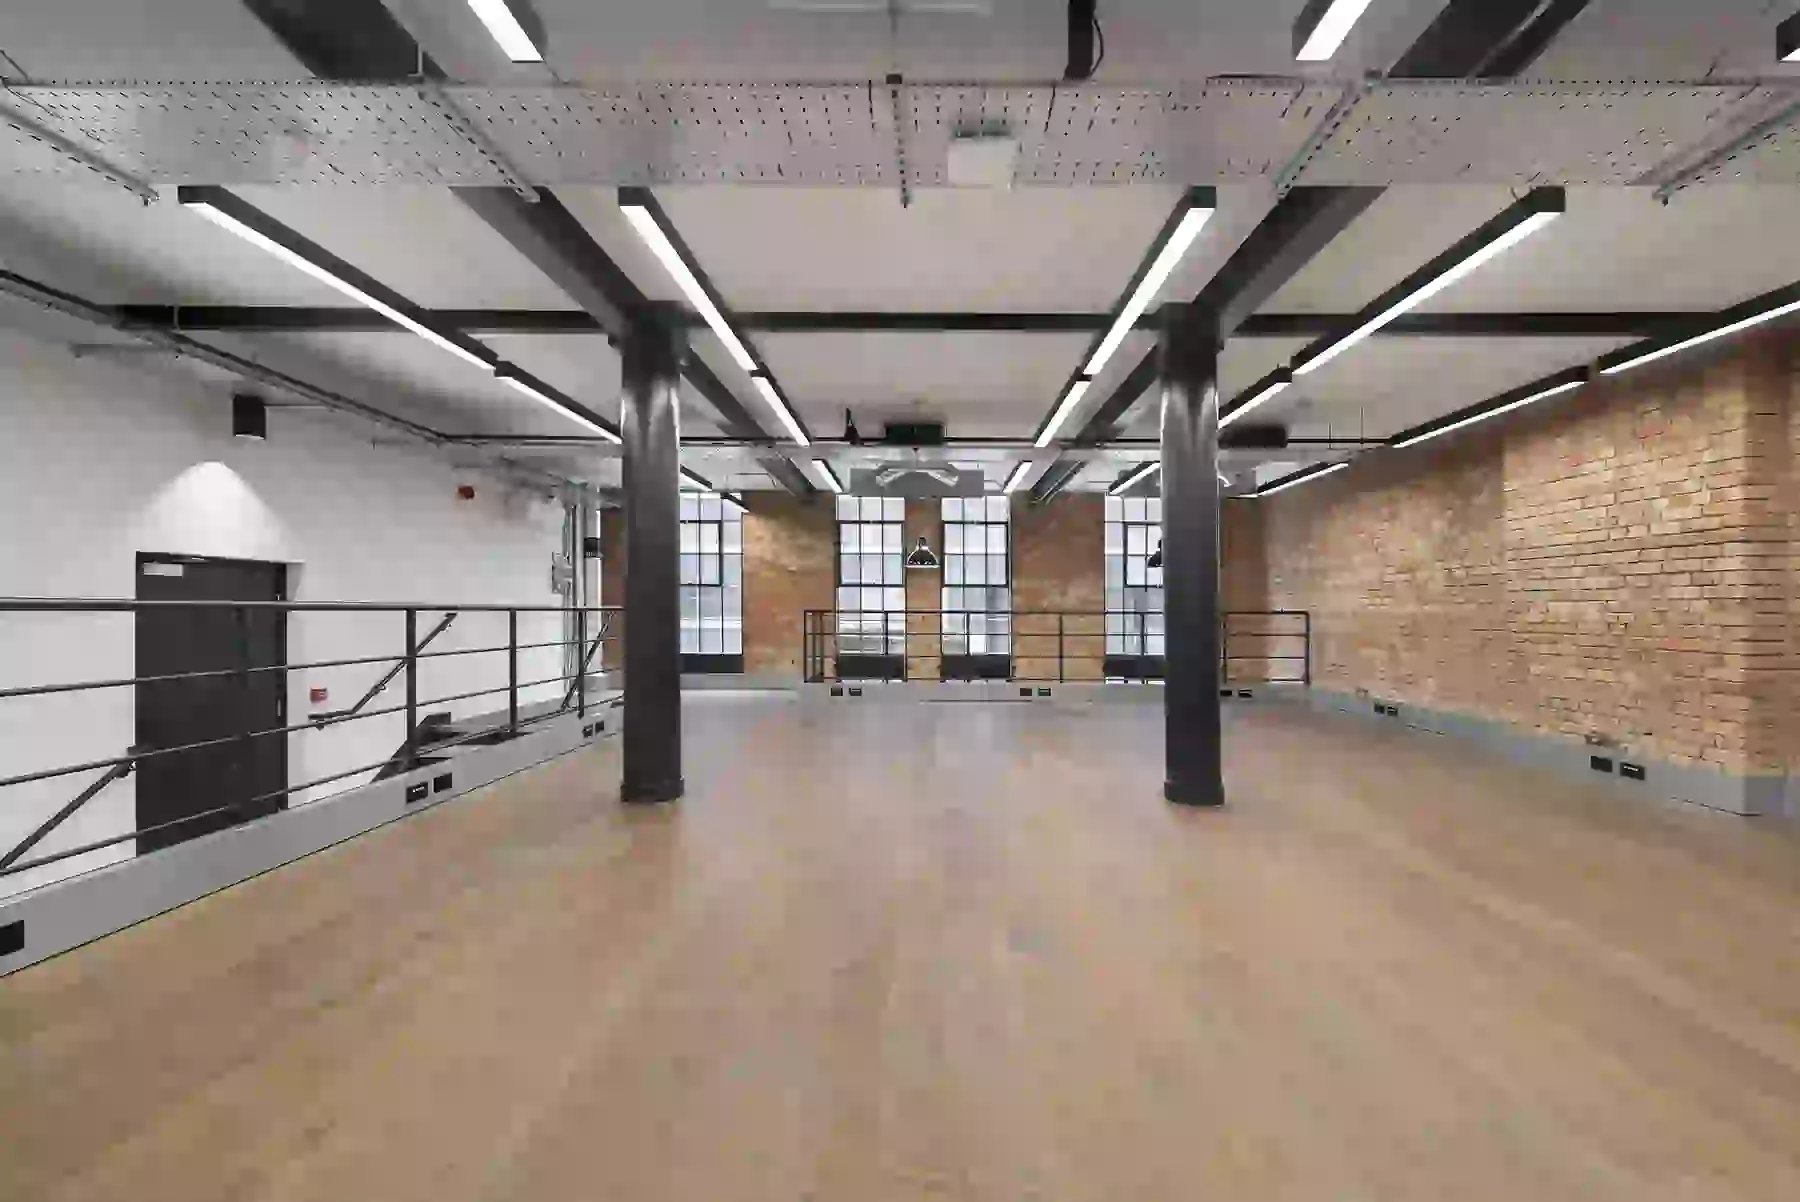 Office space to rent at Ink Rooms, 25-37 Easton Street, Clerkenwell, London, unit IR.25.G/LG, 2224 sq ft (206 sq m).